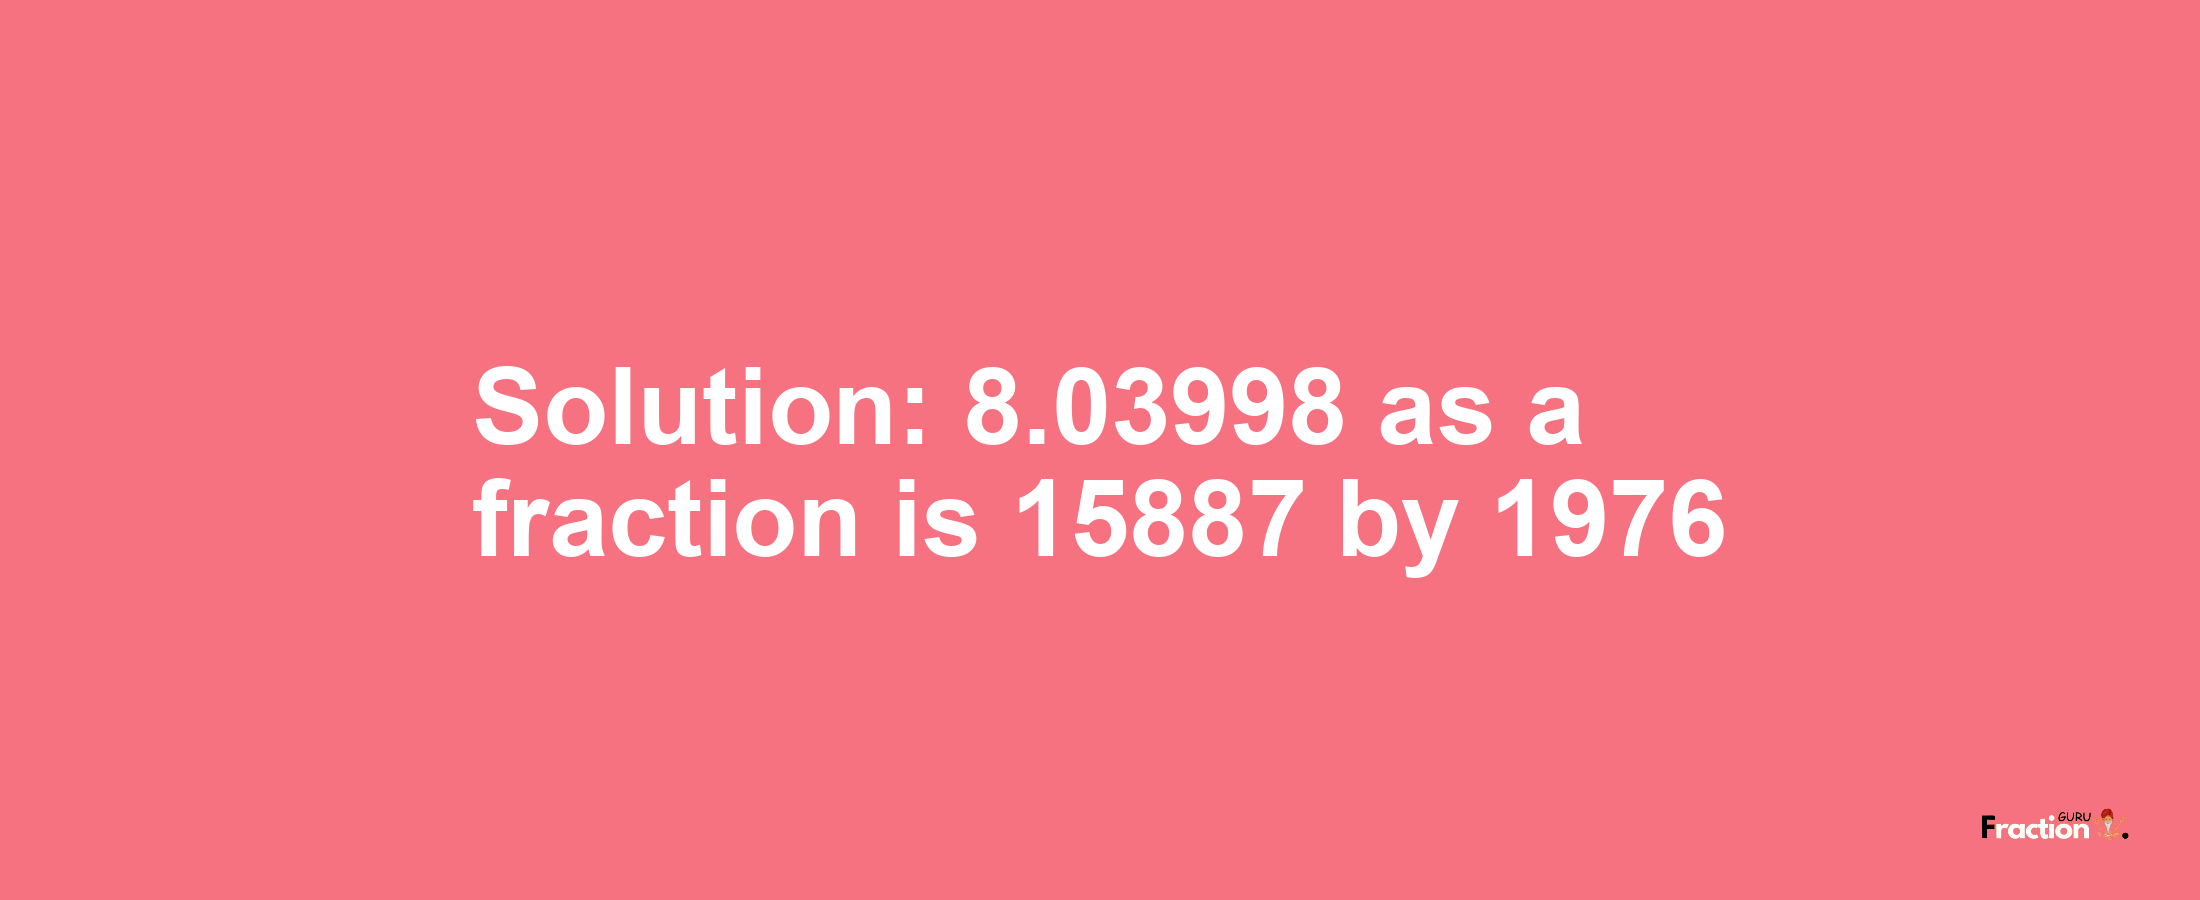 Solution:8.03998 as a fraction is 15887/1976